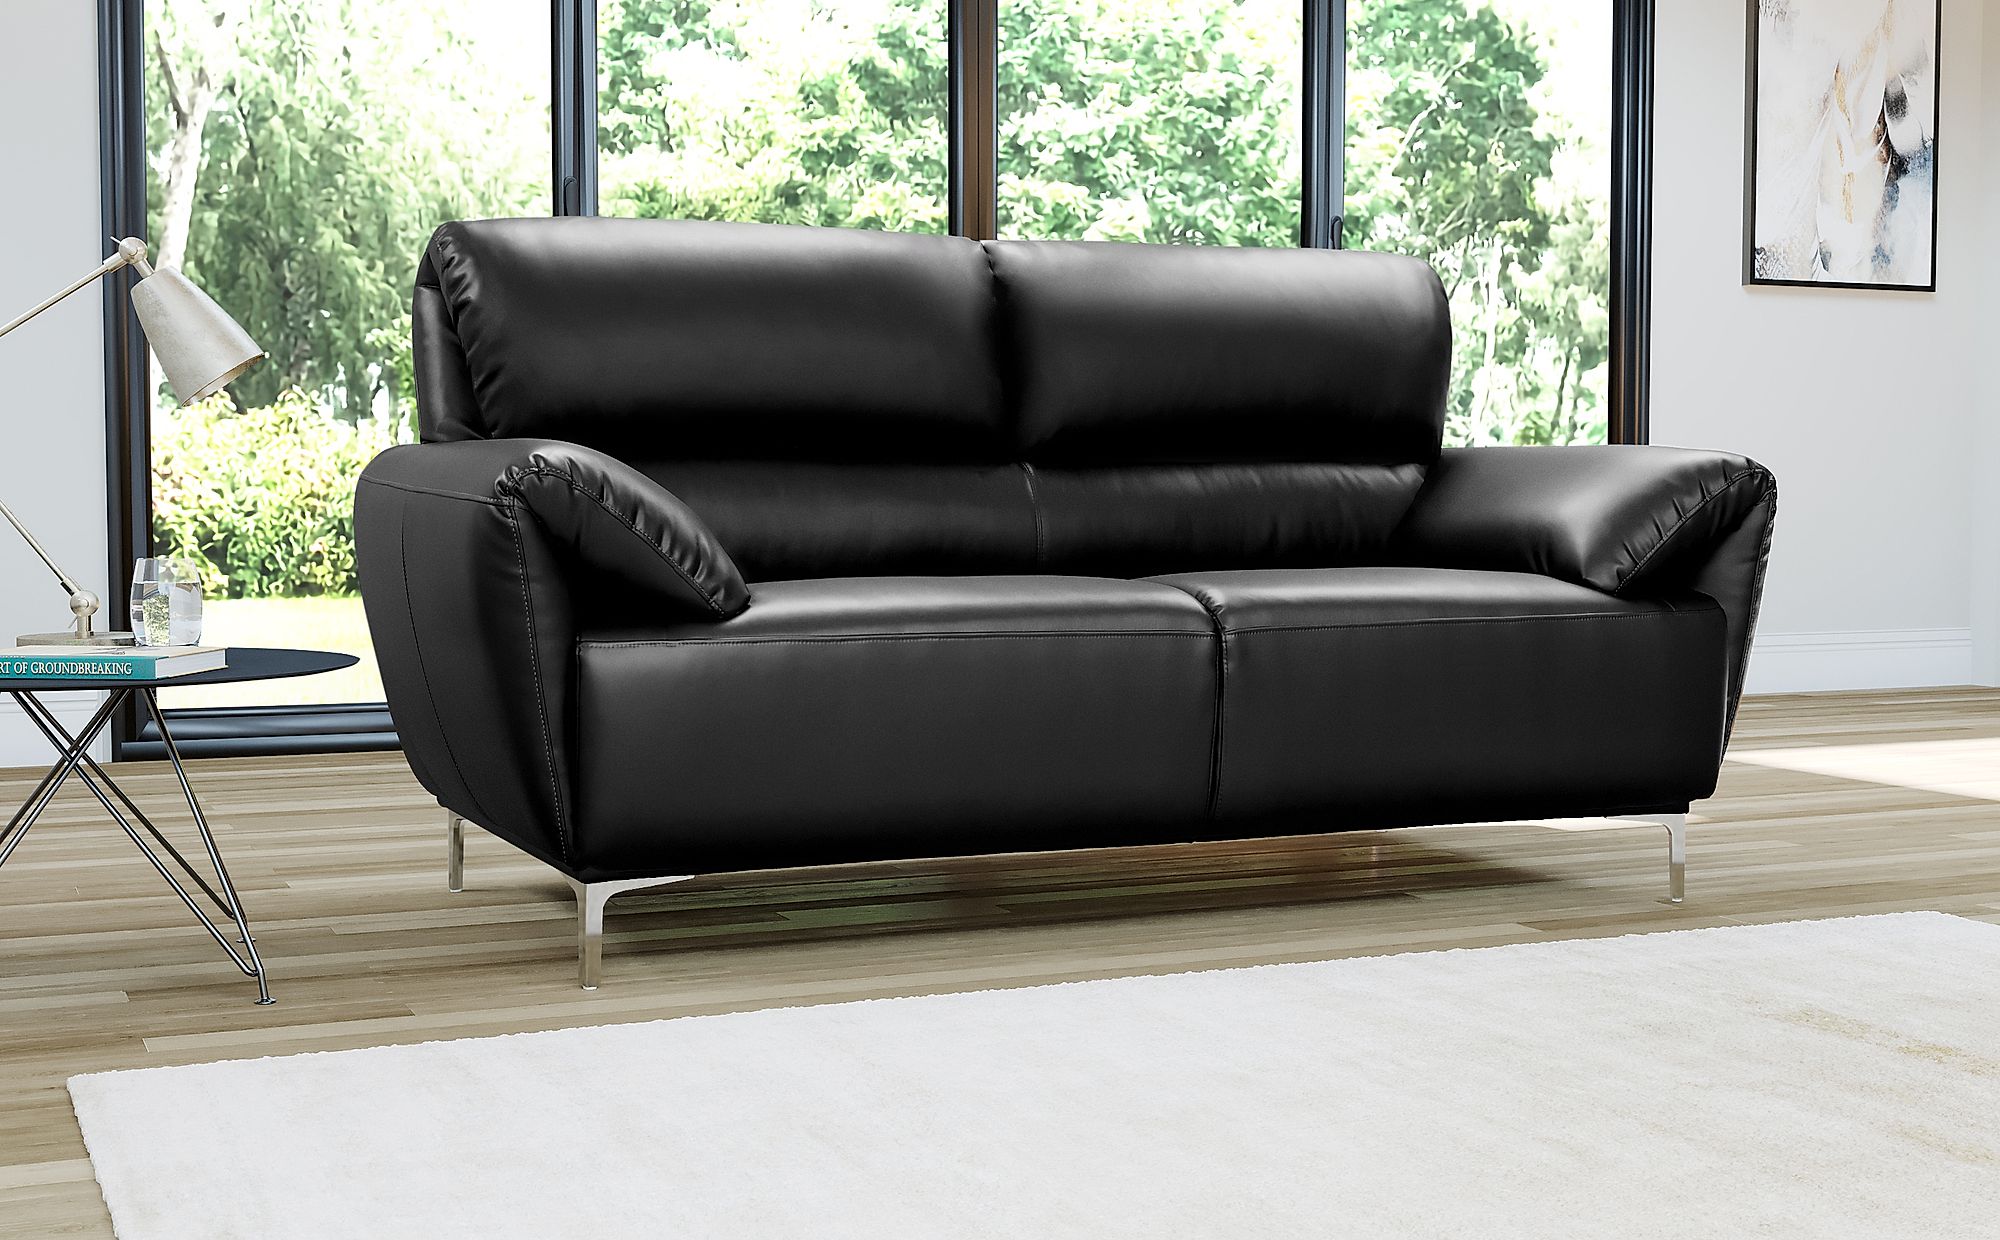 black leather sofa chair used